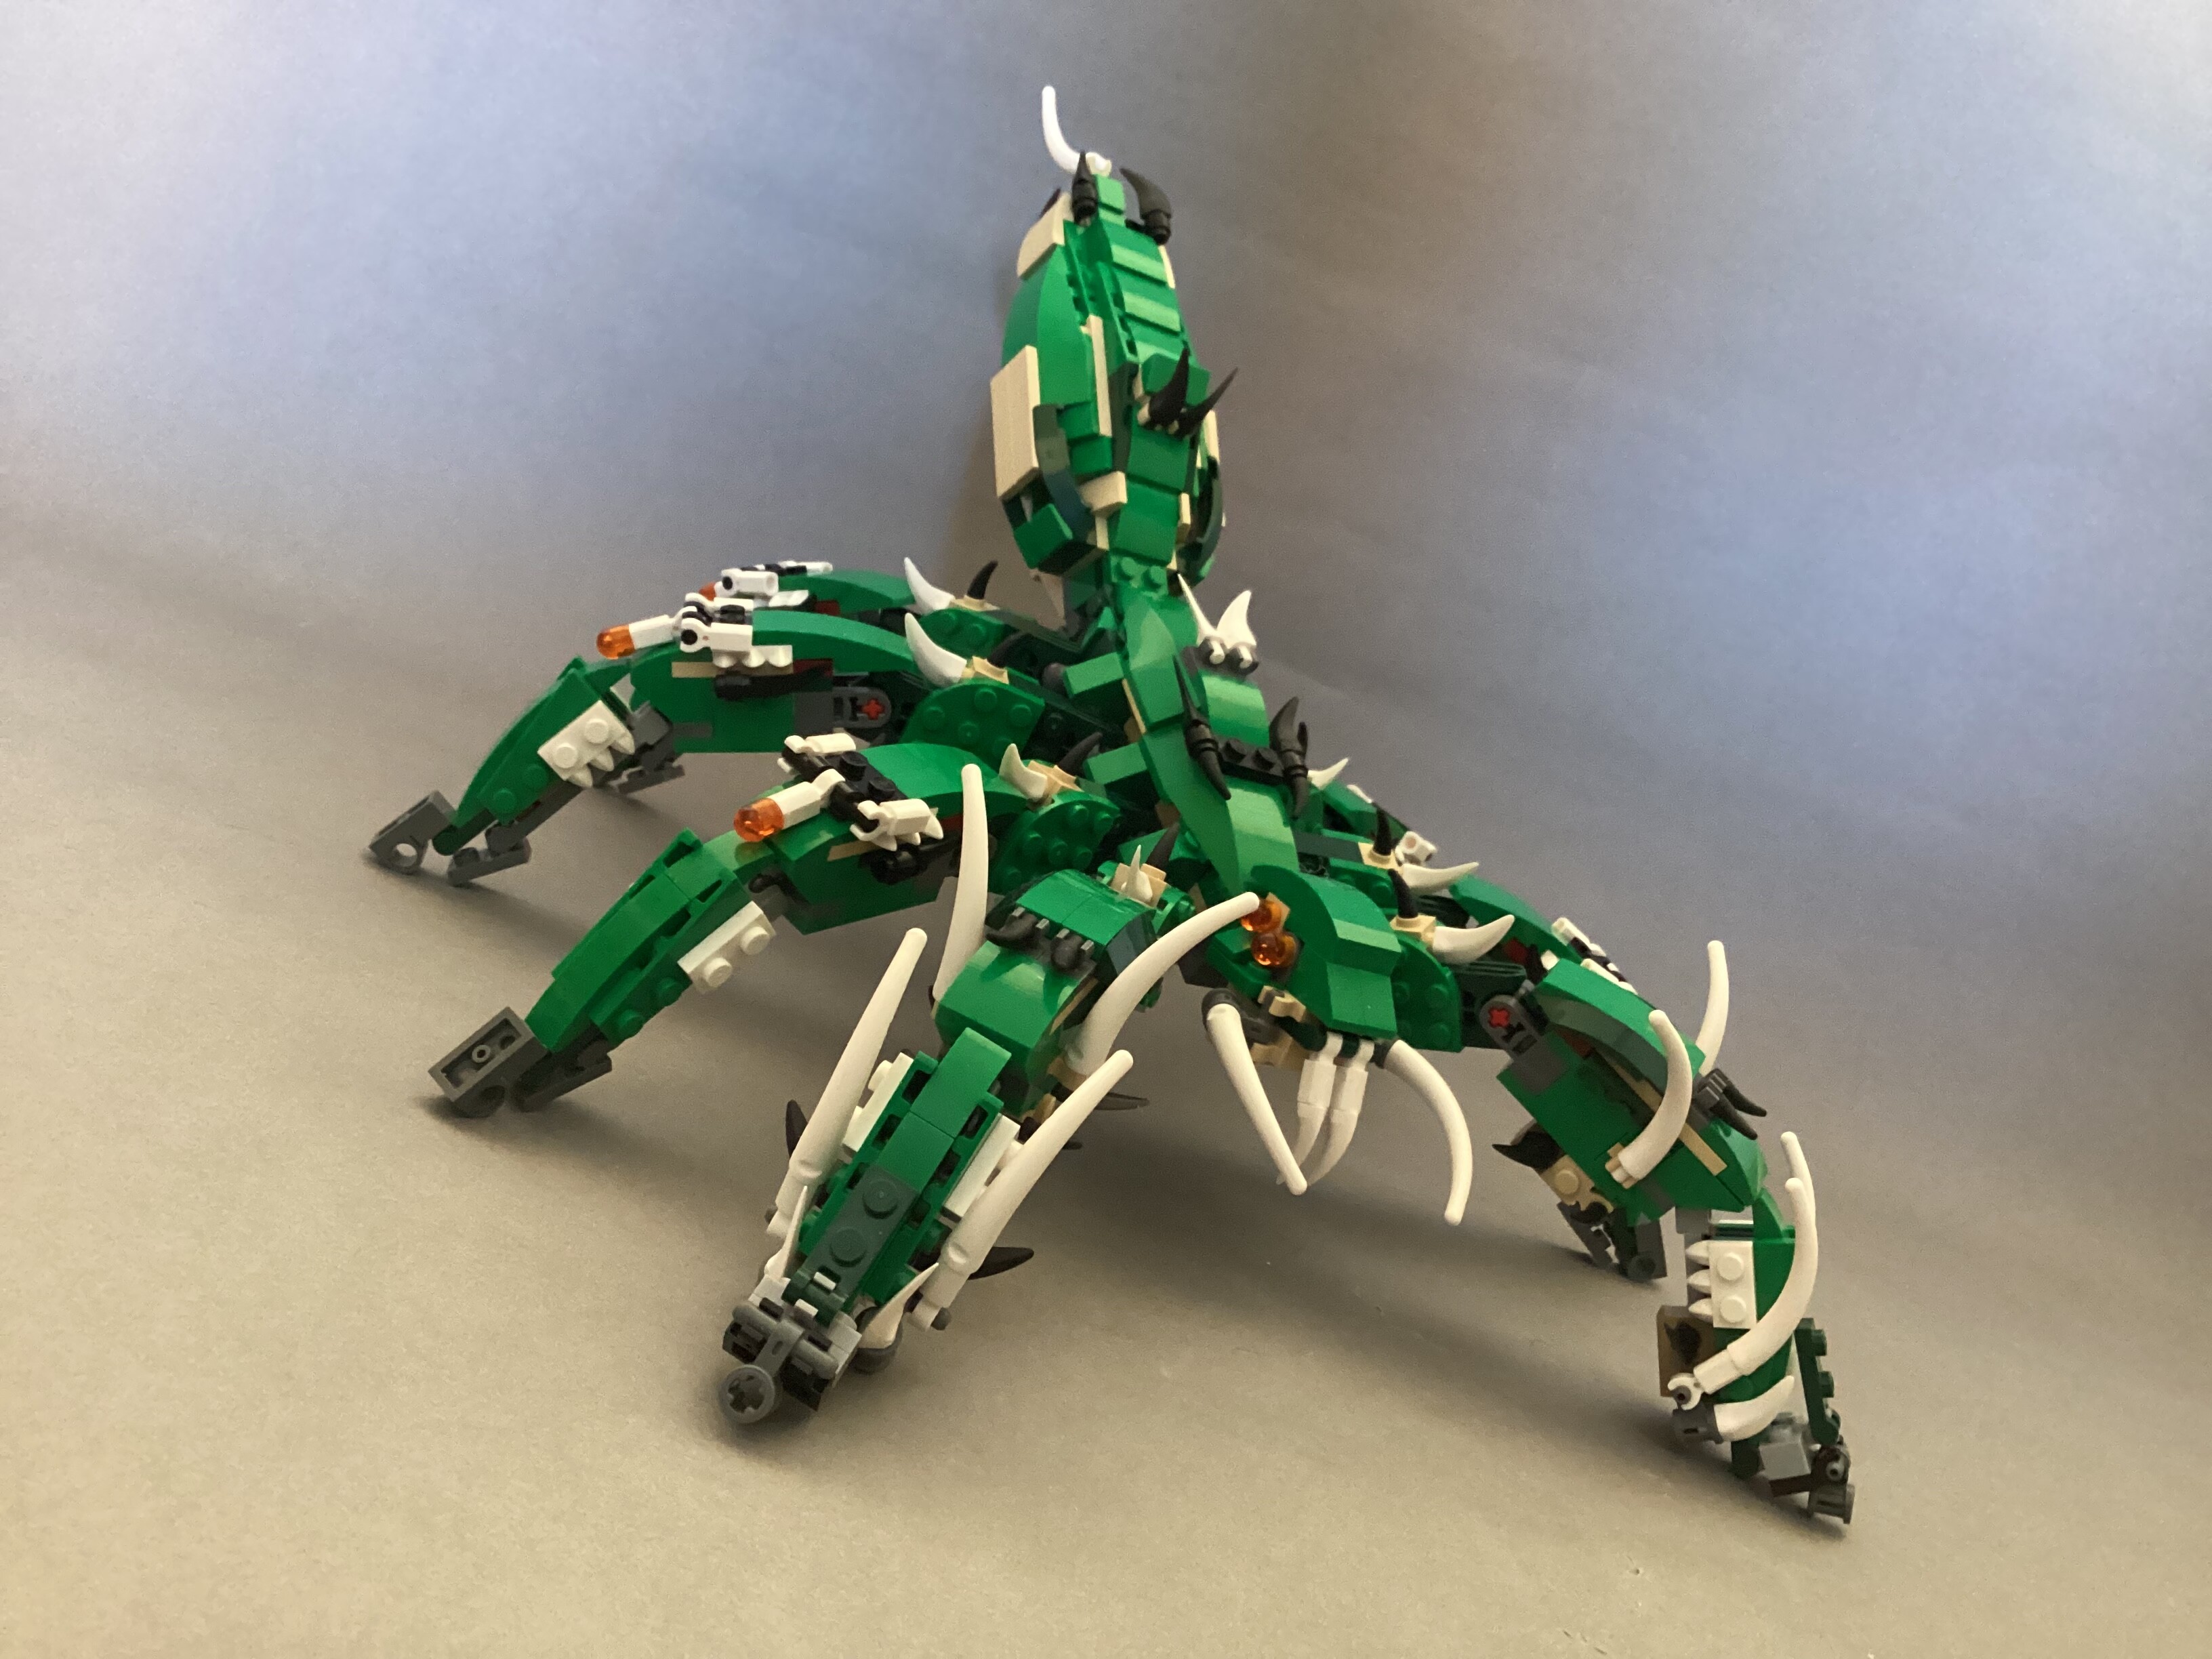 Mega Spider (4x 31058) - Lego Creations - The TTV Message Boards